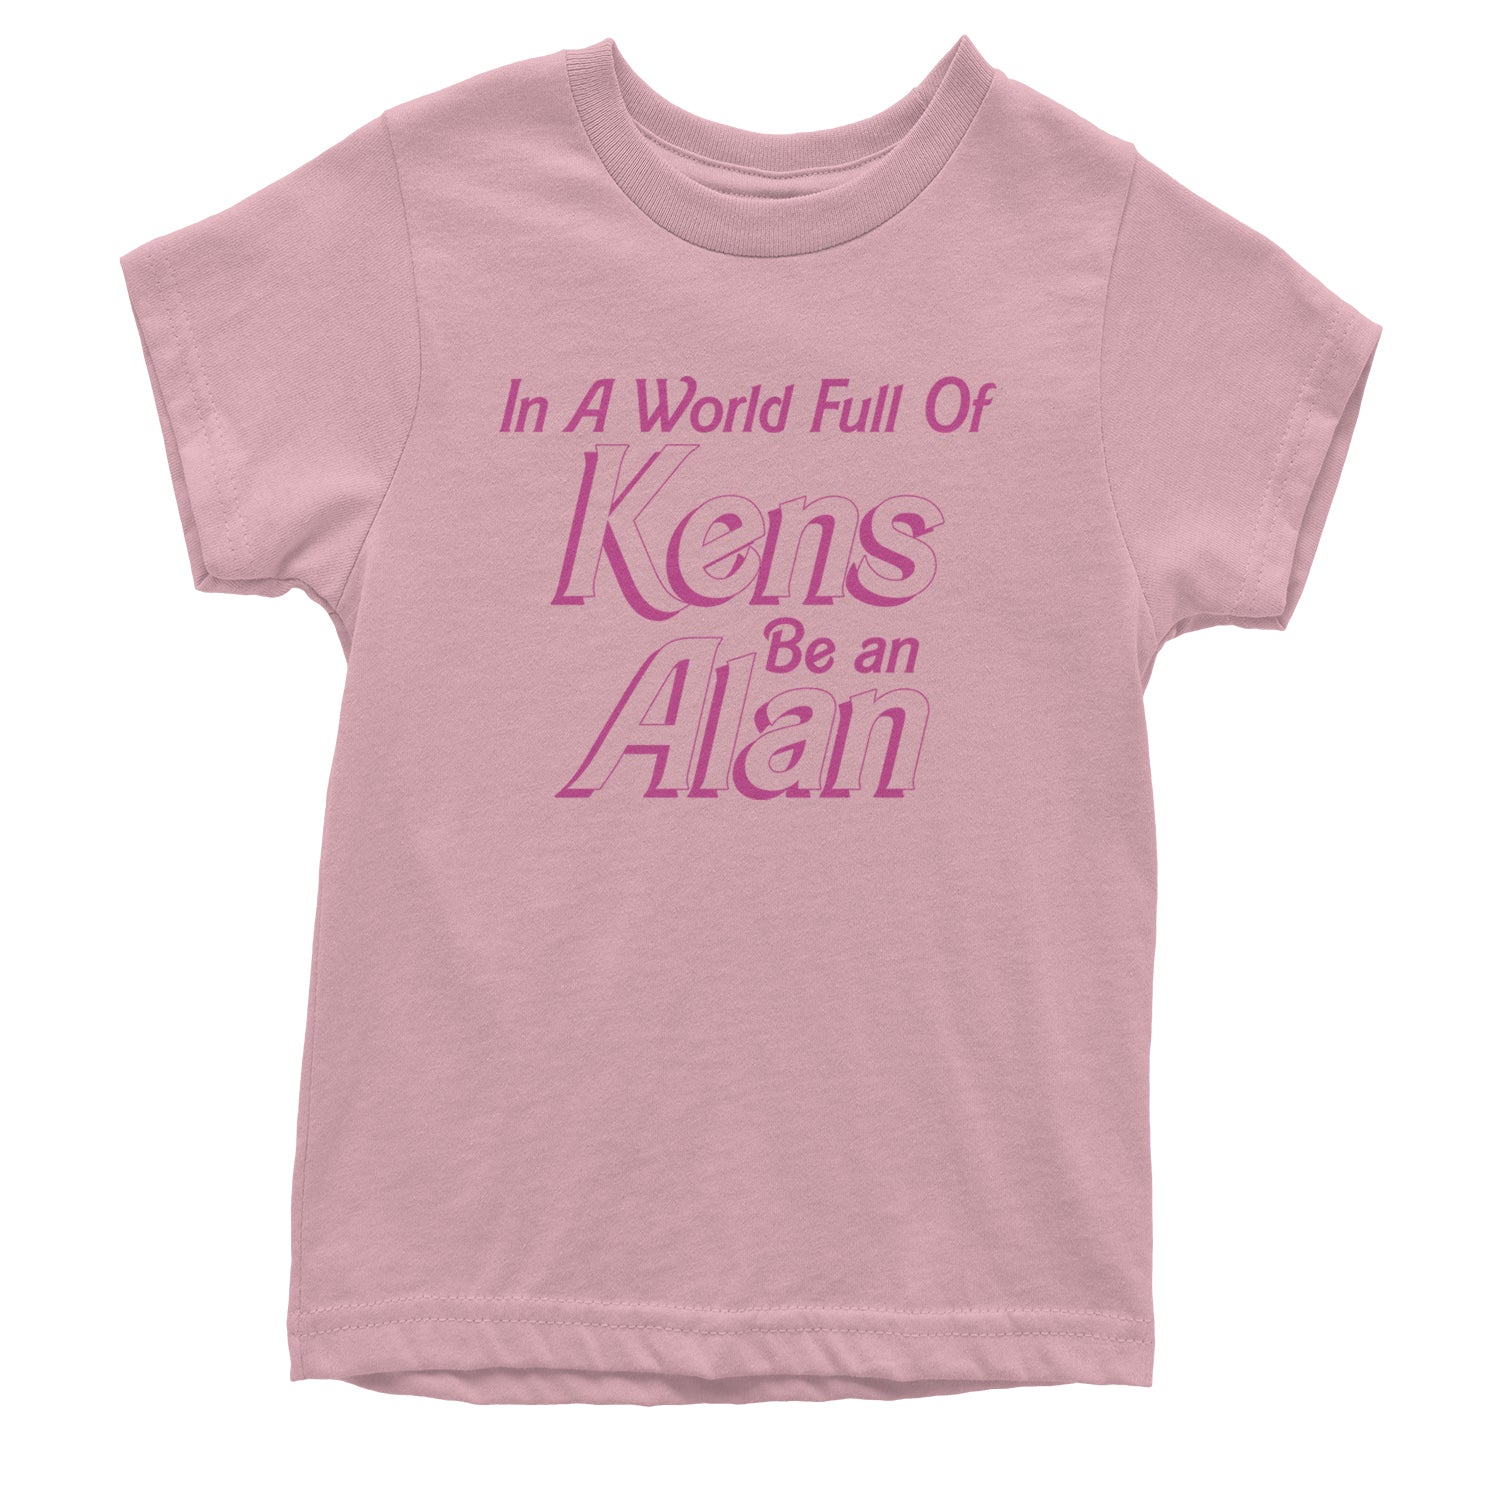 In A World Full Of Kens, Be an Alan Youth T-shirt